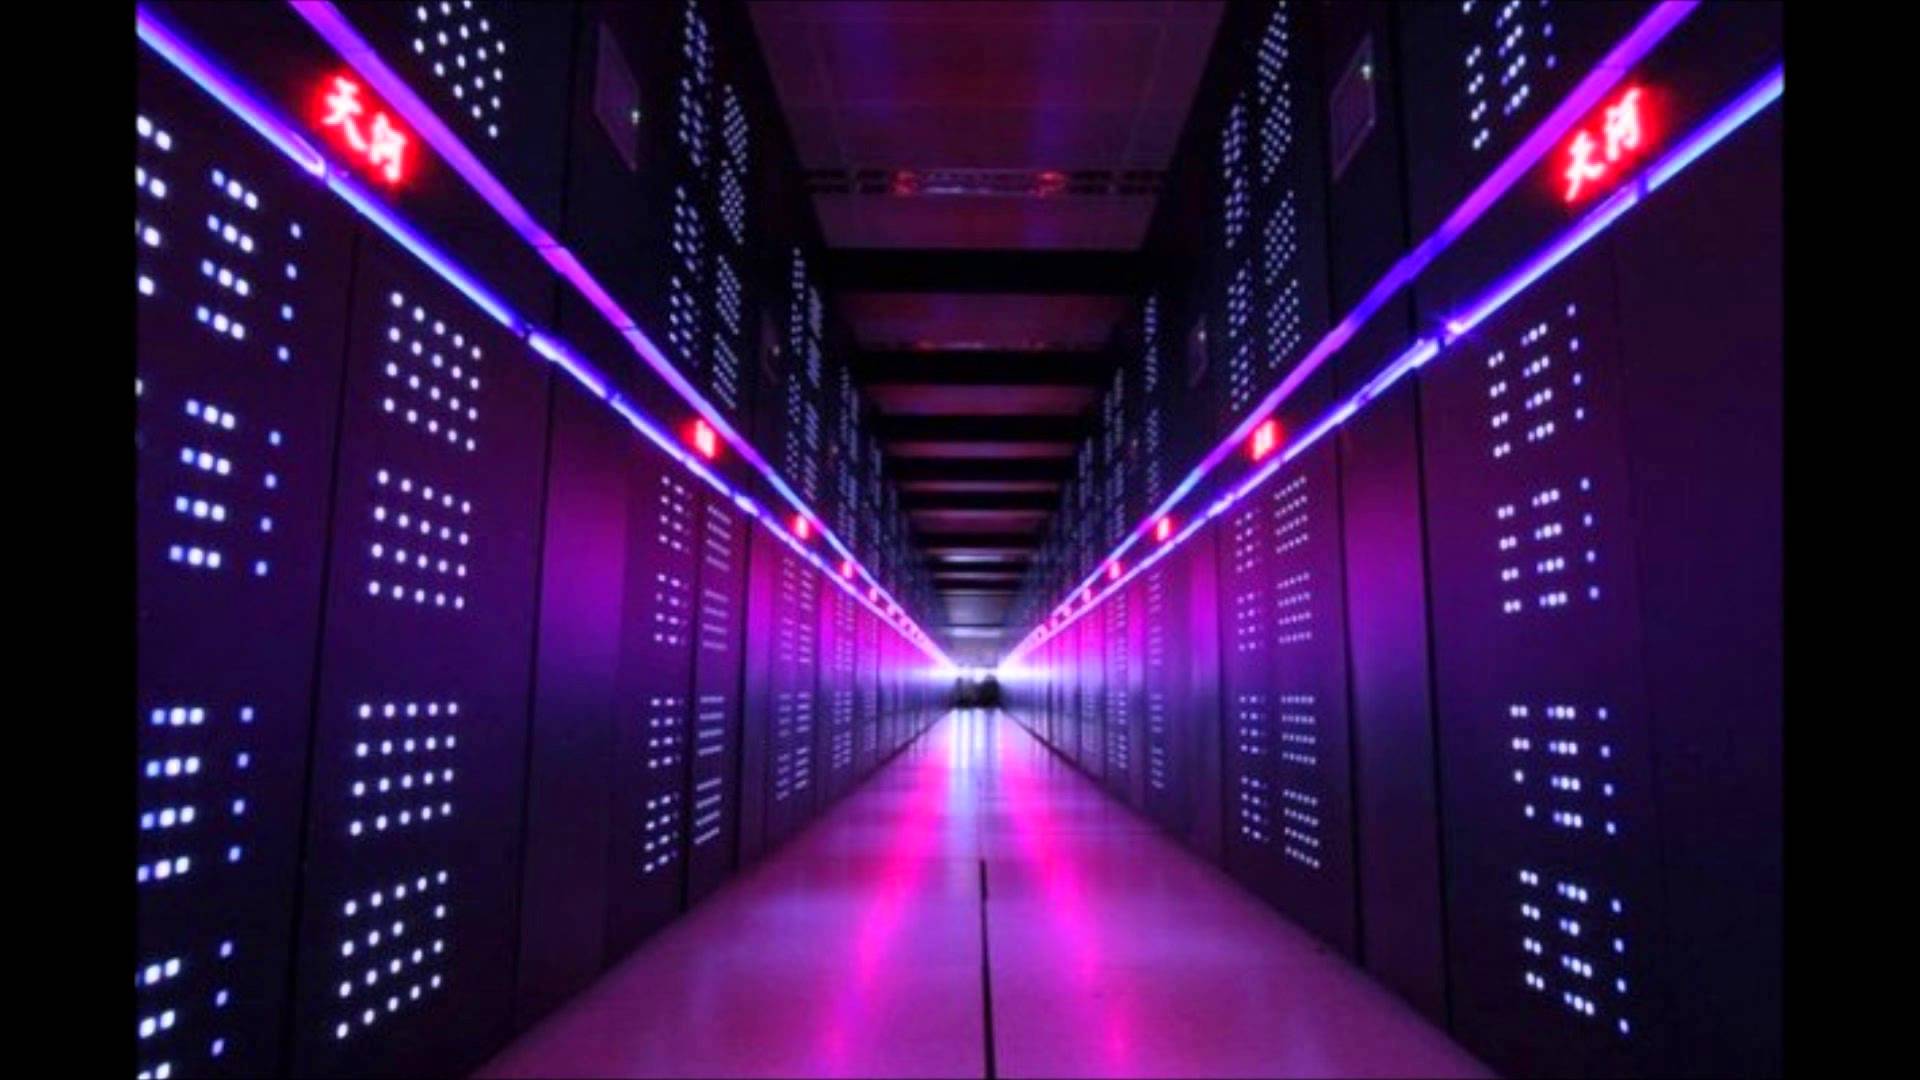 New Chinese Supercomputer Goes Beta (Tianhe 2 Ahead Of Schedule And On Budget)